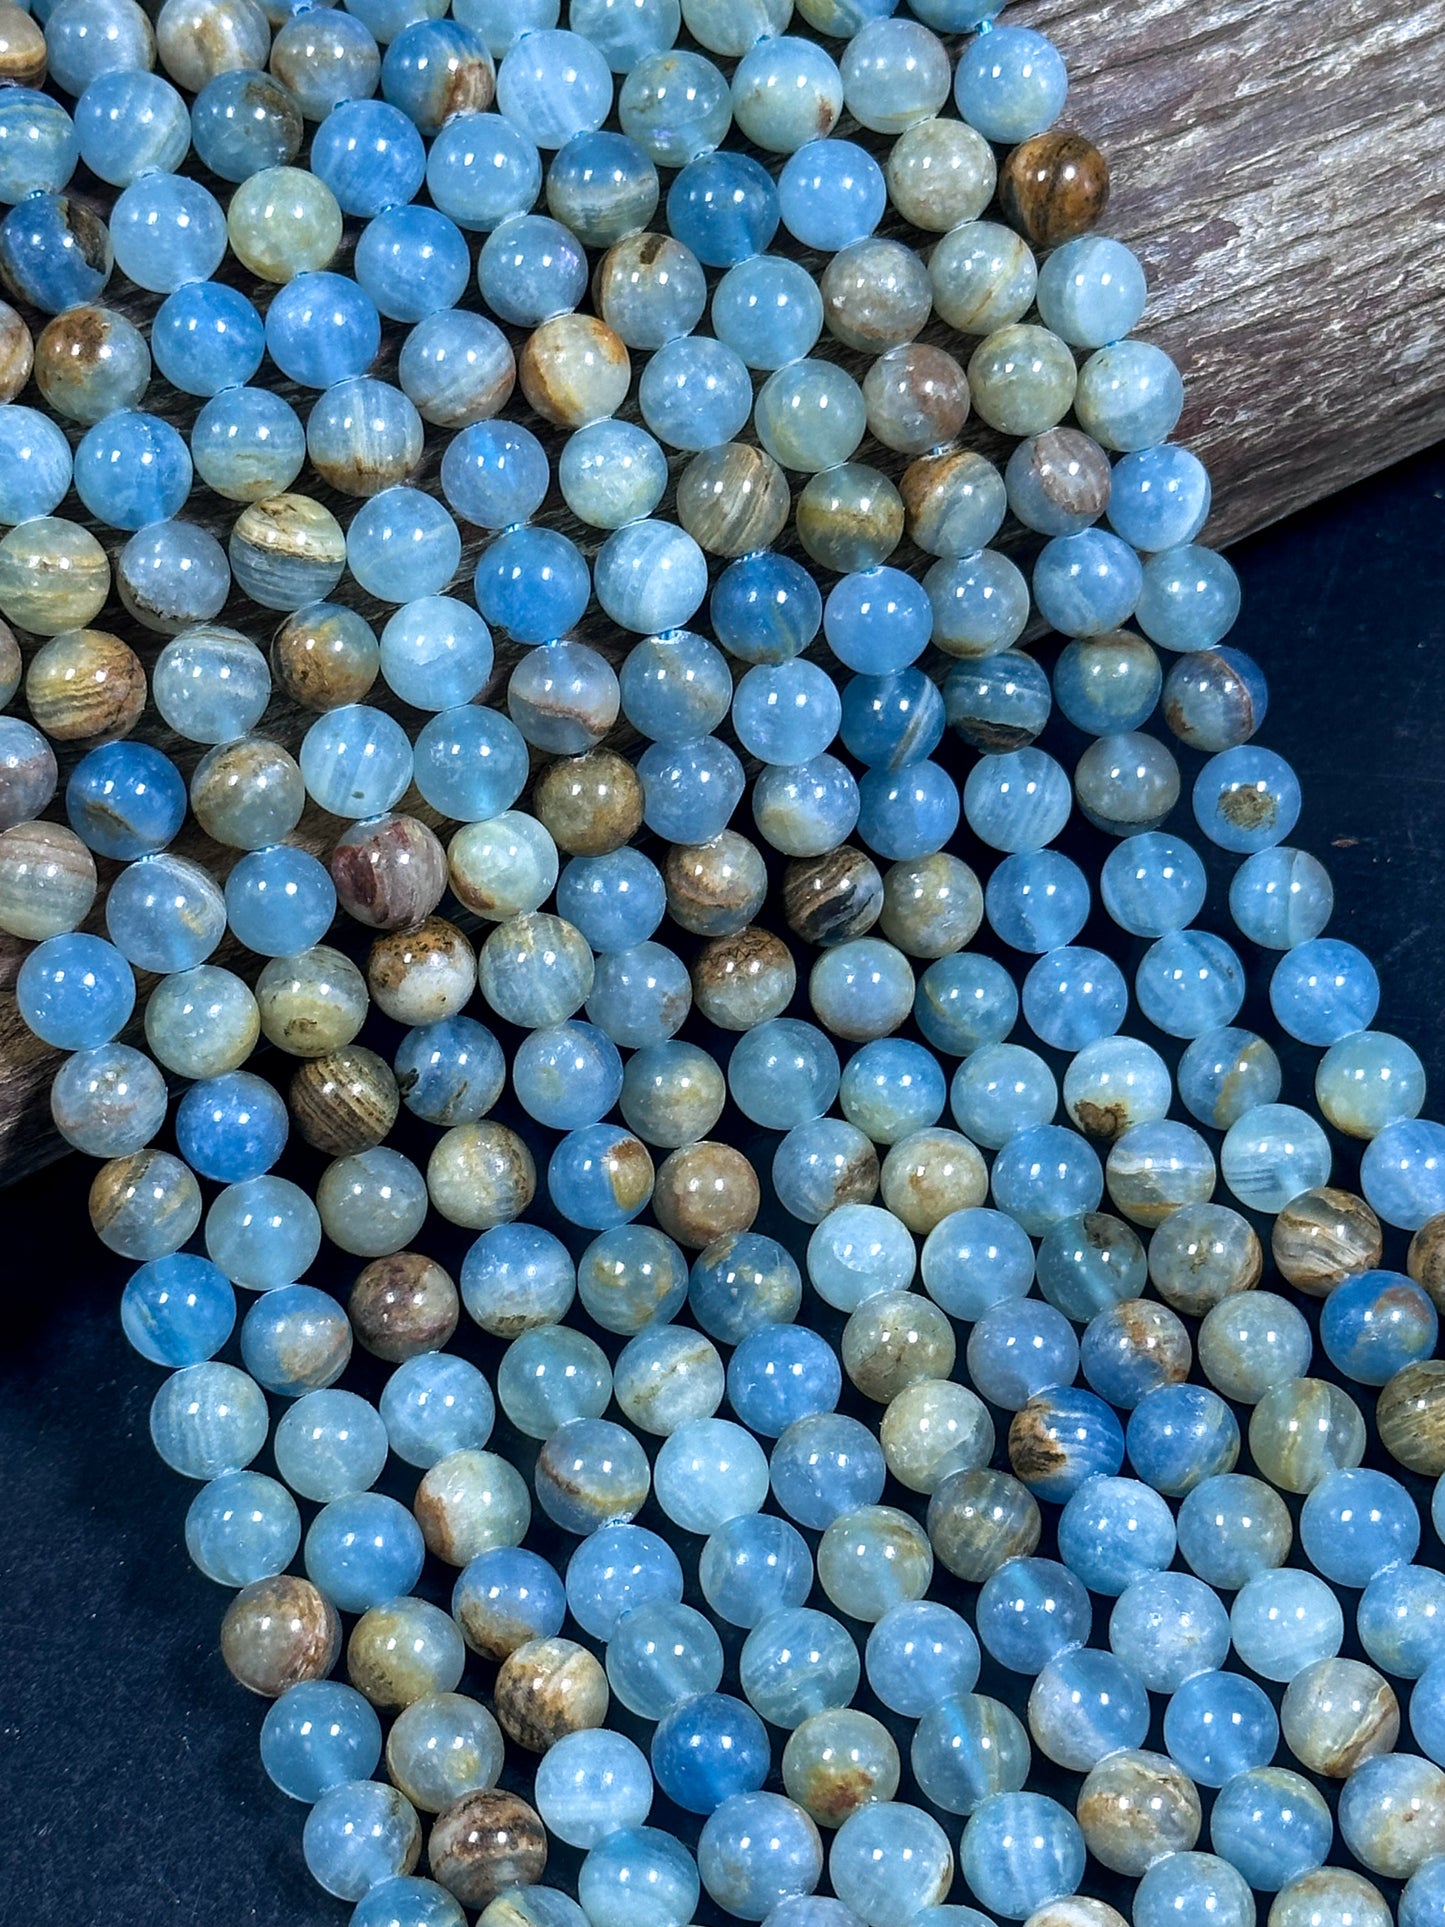 AAA NATURAL Blue Calcite Gemstone Bead 6mm 8mm 10mm Round Beads, Gorgeous Natural Blue Brown Color Calcite Full Strand 15.5" Great Quality